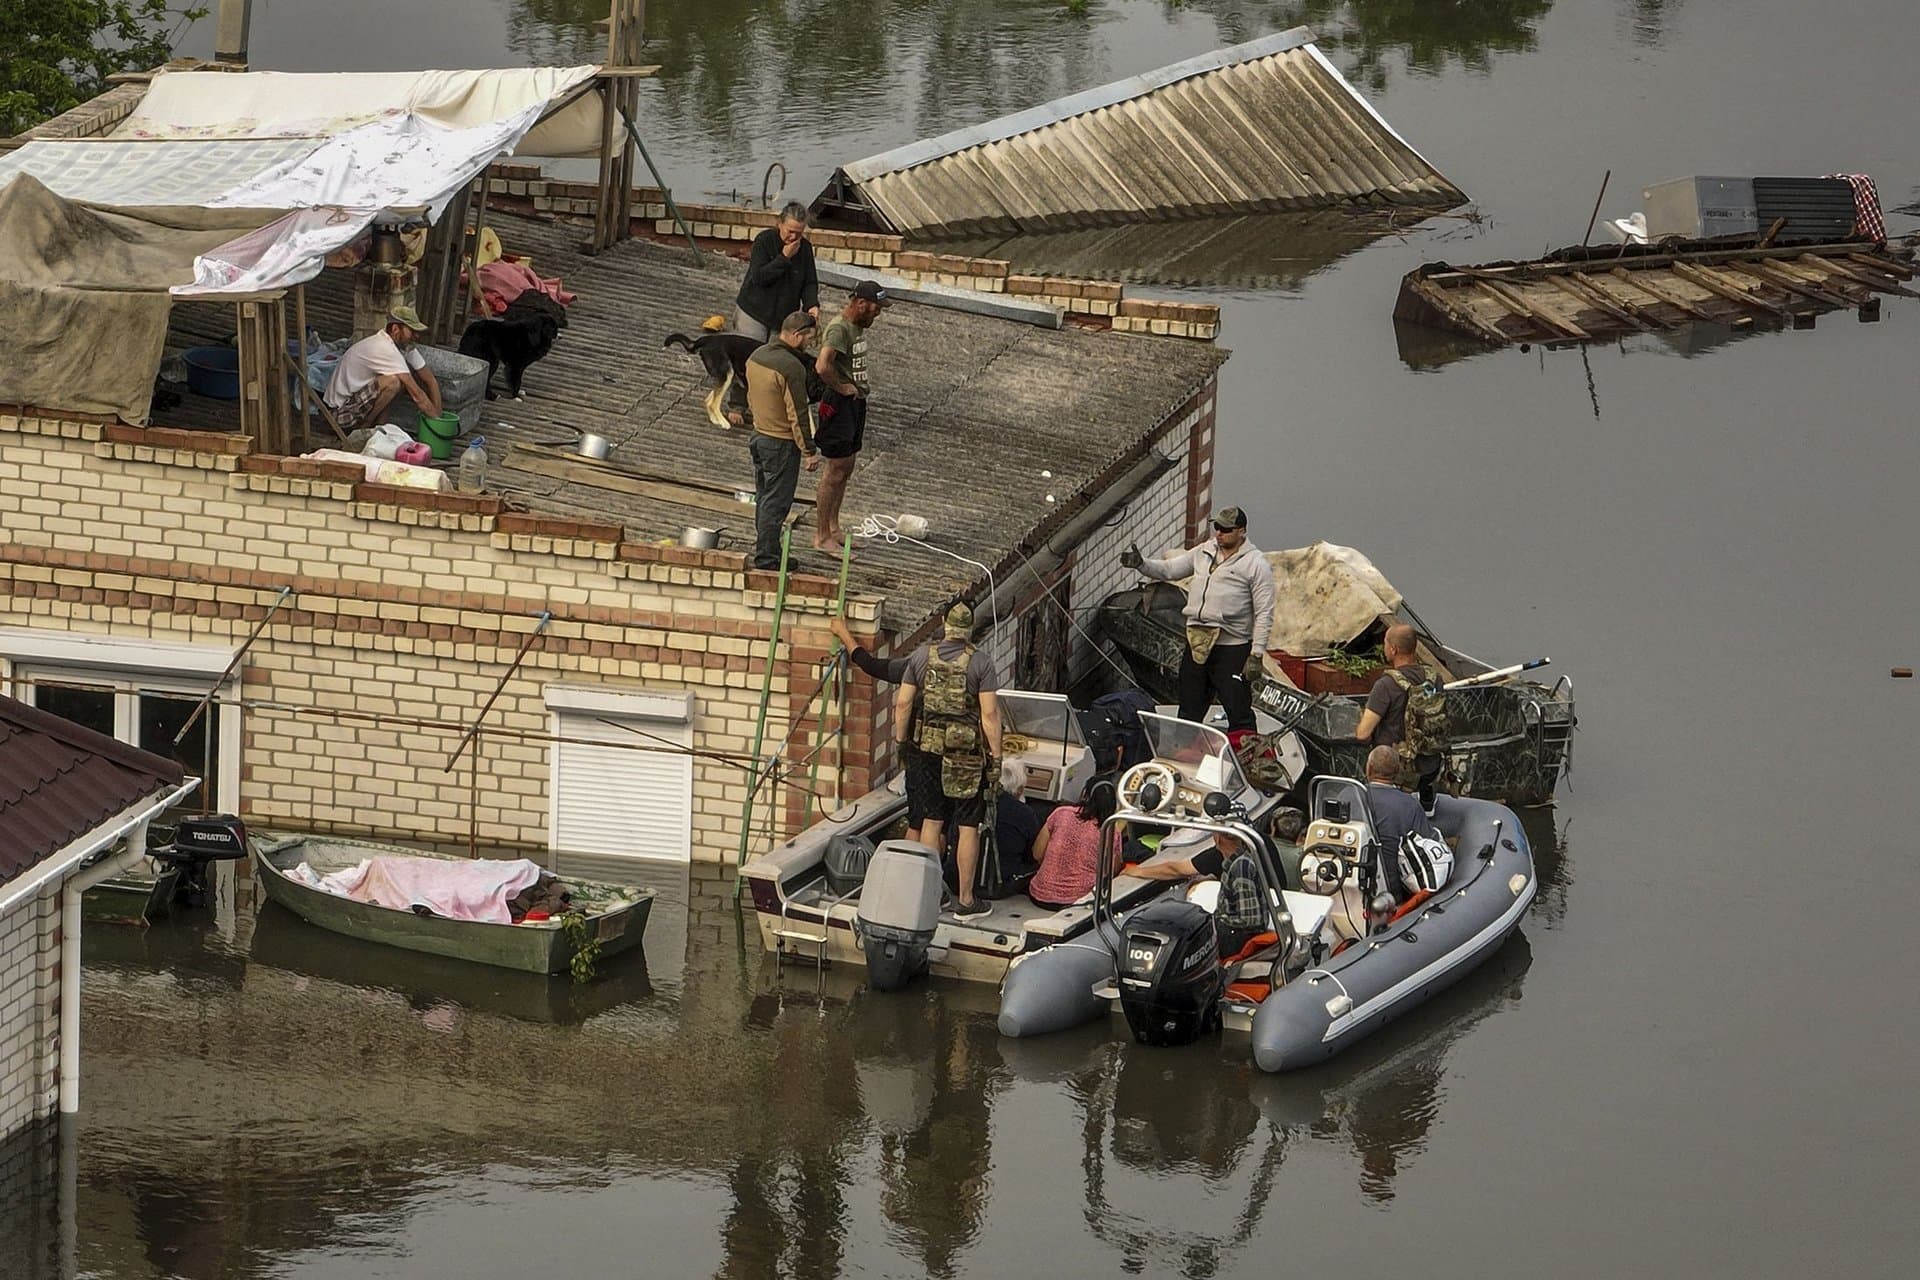 Ukrainian servicemen help residents to get down from the roof into rescue boats during an evacuation in a flooded neighborhood near Oleshky